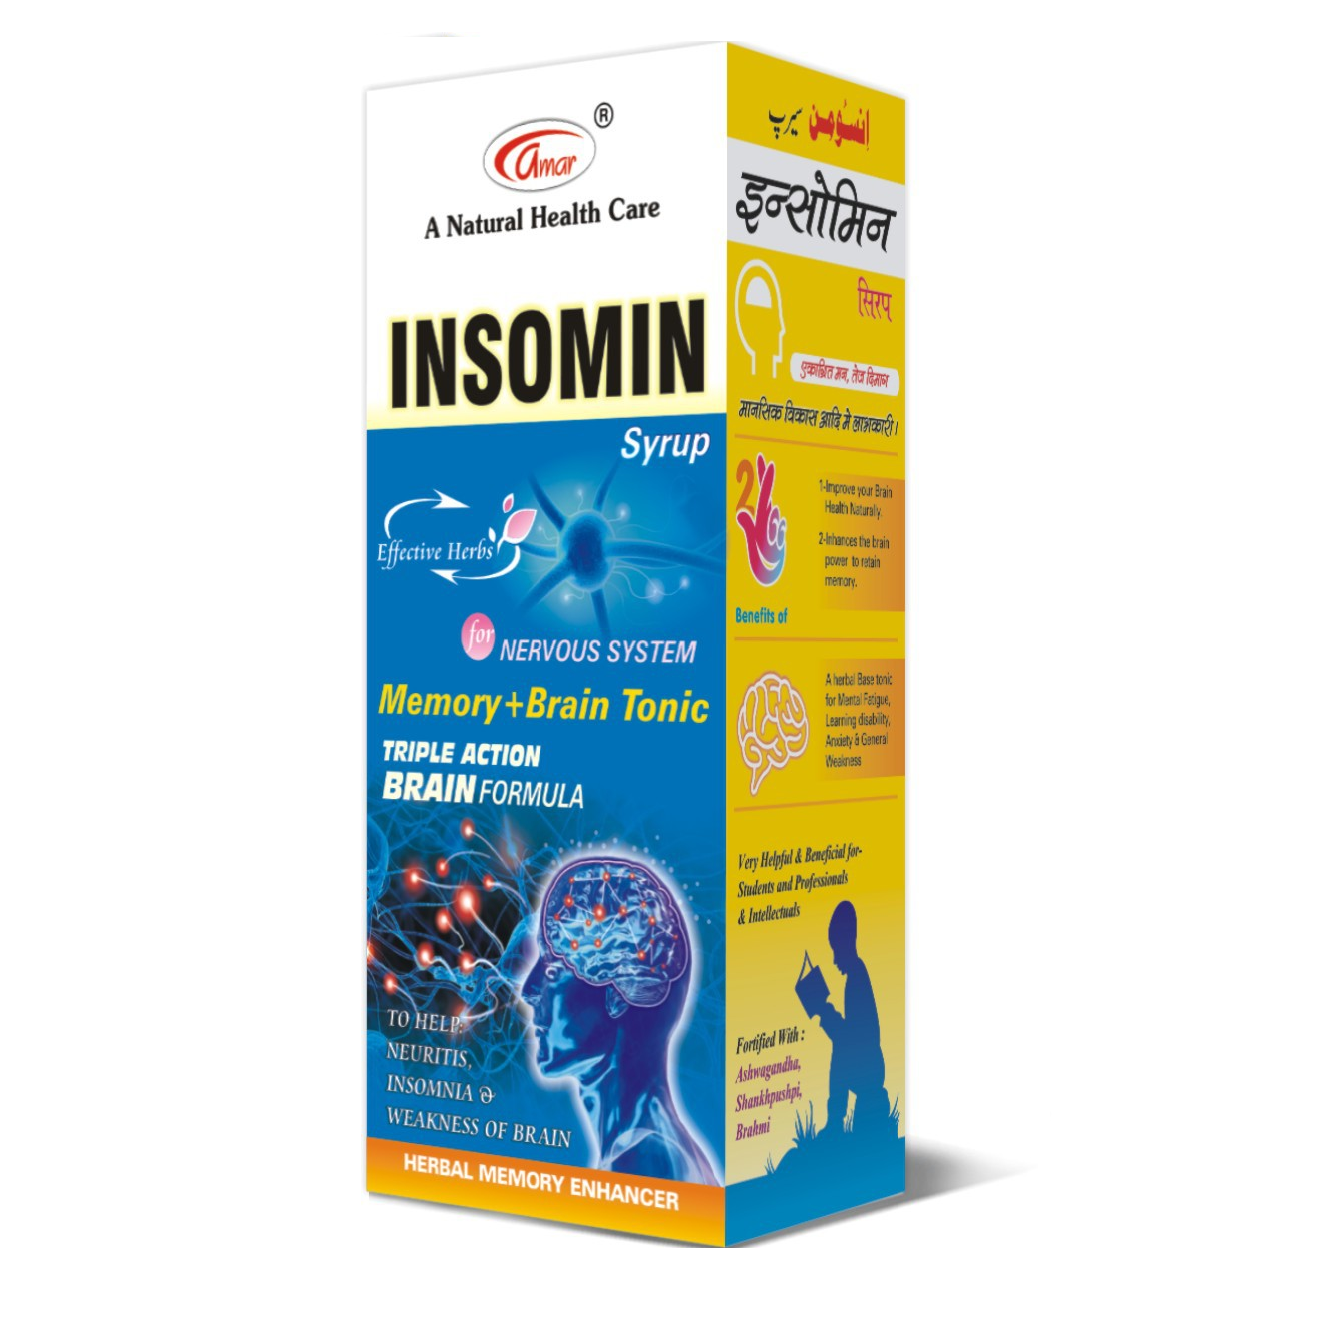 Insomin - image 0